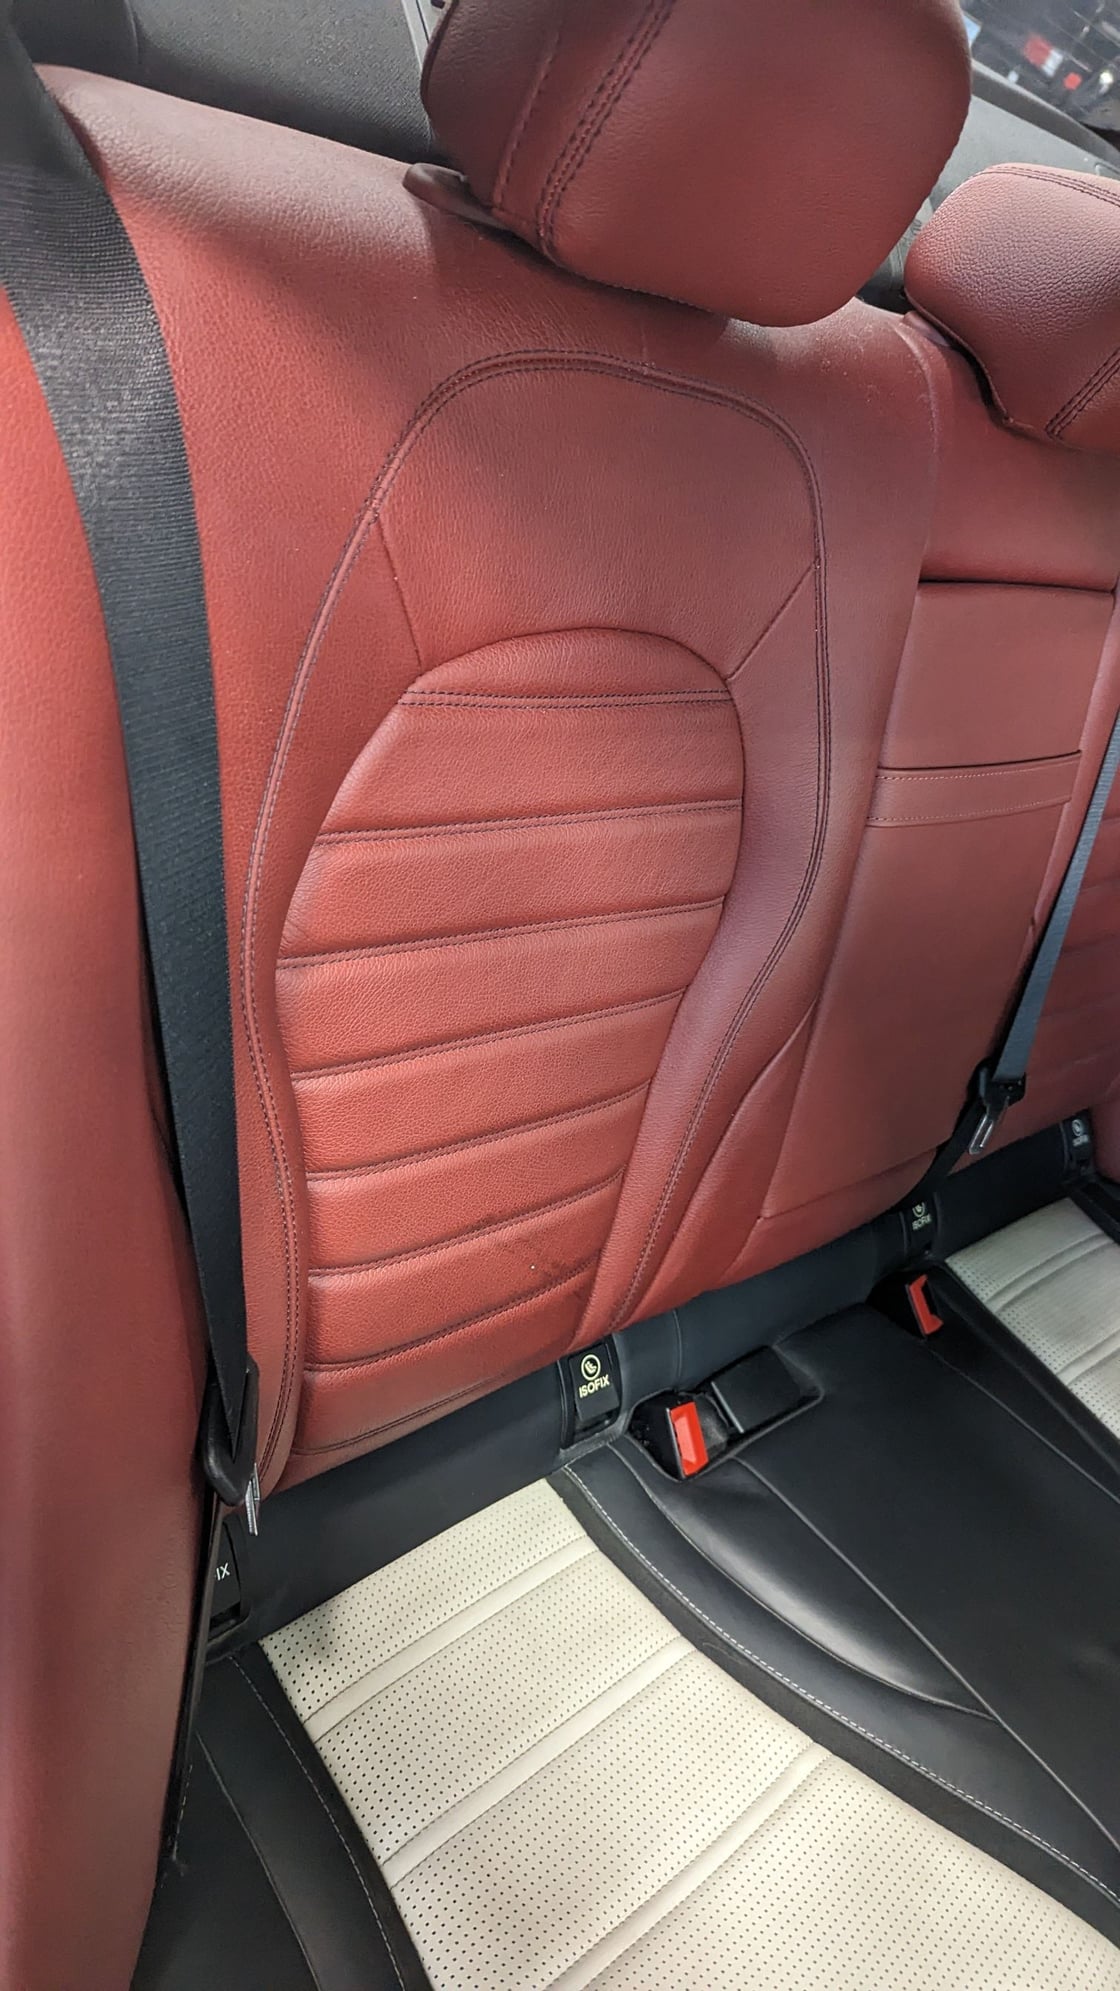 Interior/Upholstery - w205 Red leather interior seats and door panels - Used - 2014 to 2021 Mercedes-Benz C-Class - Bentonville, AR 72712, United States